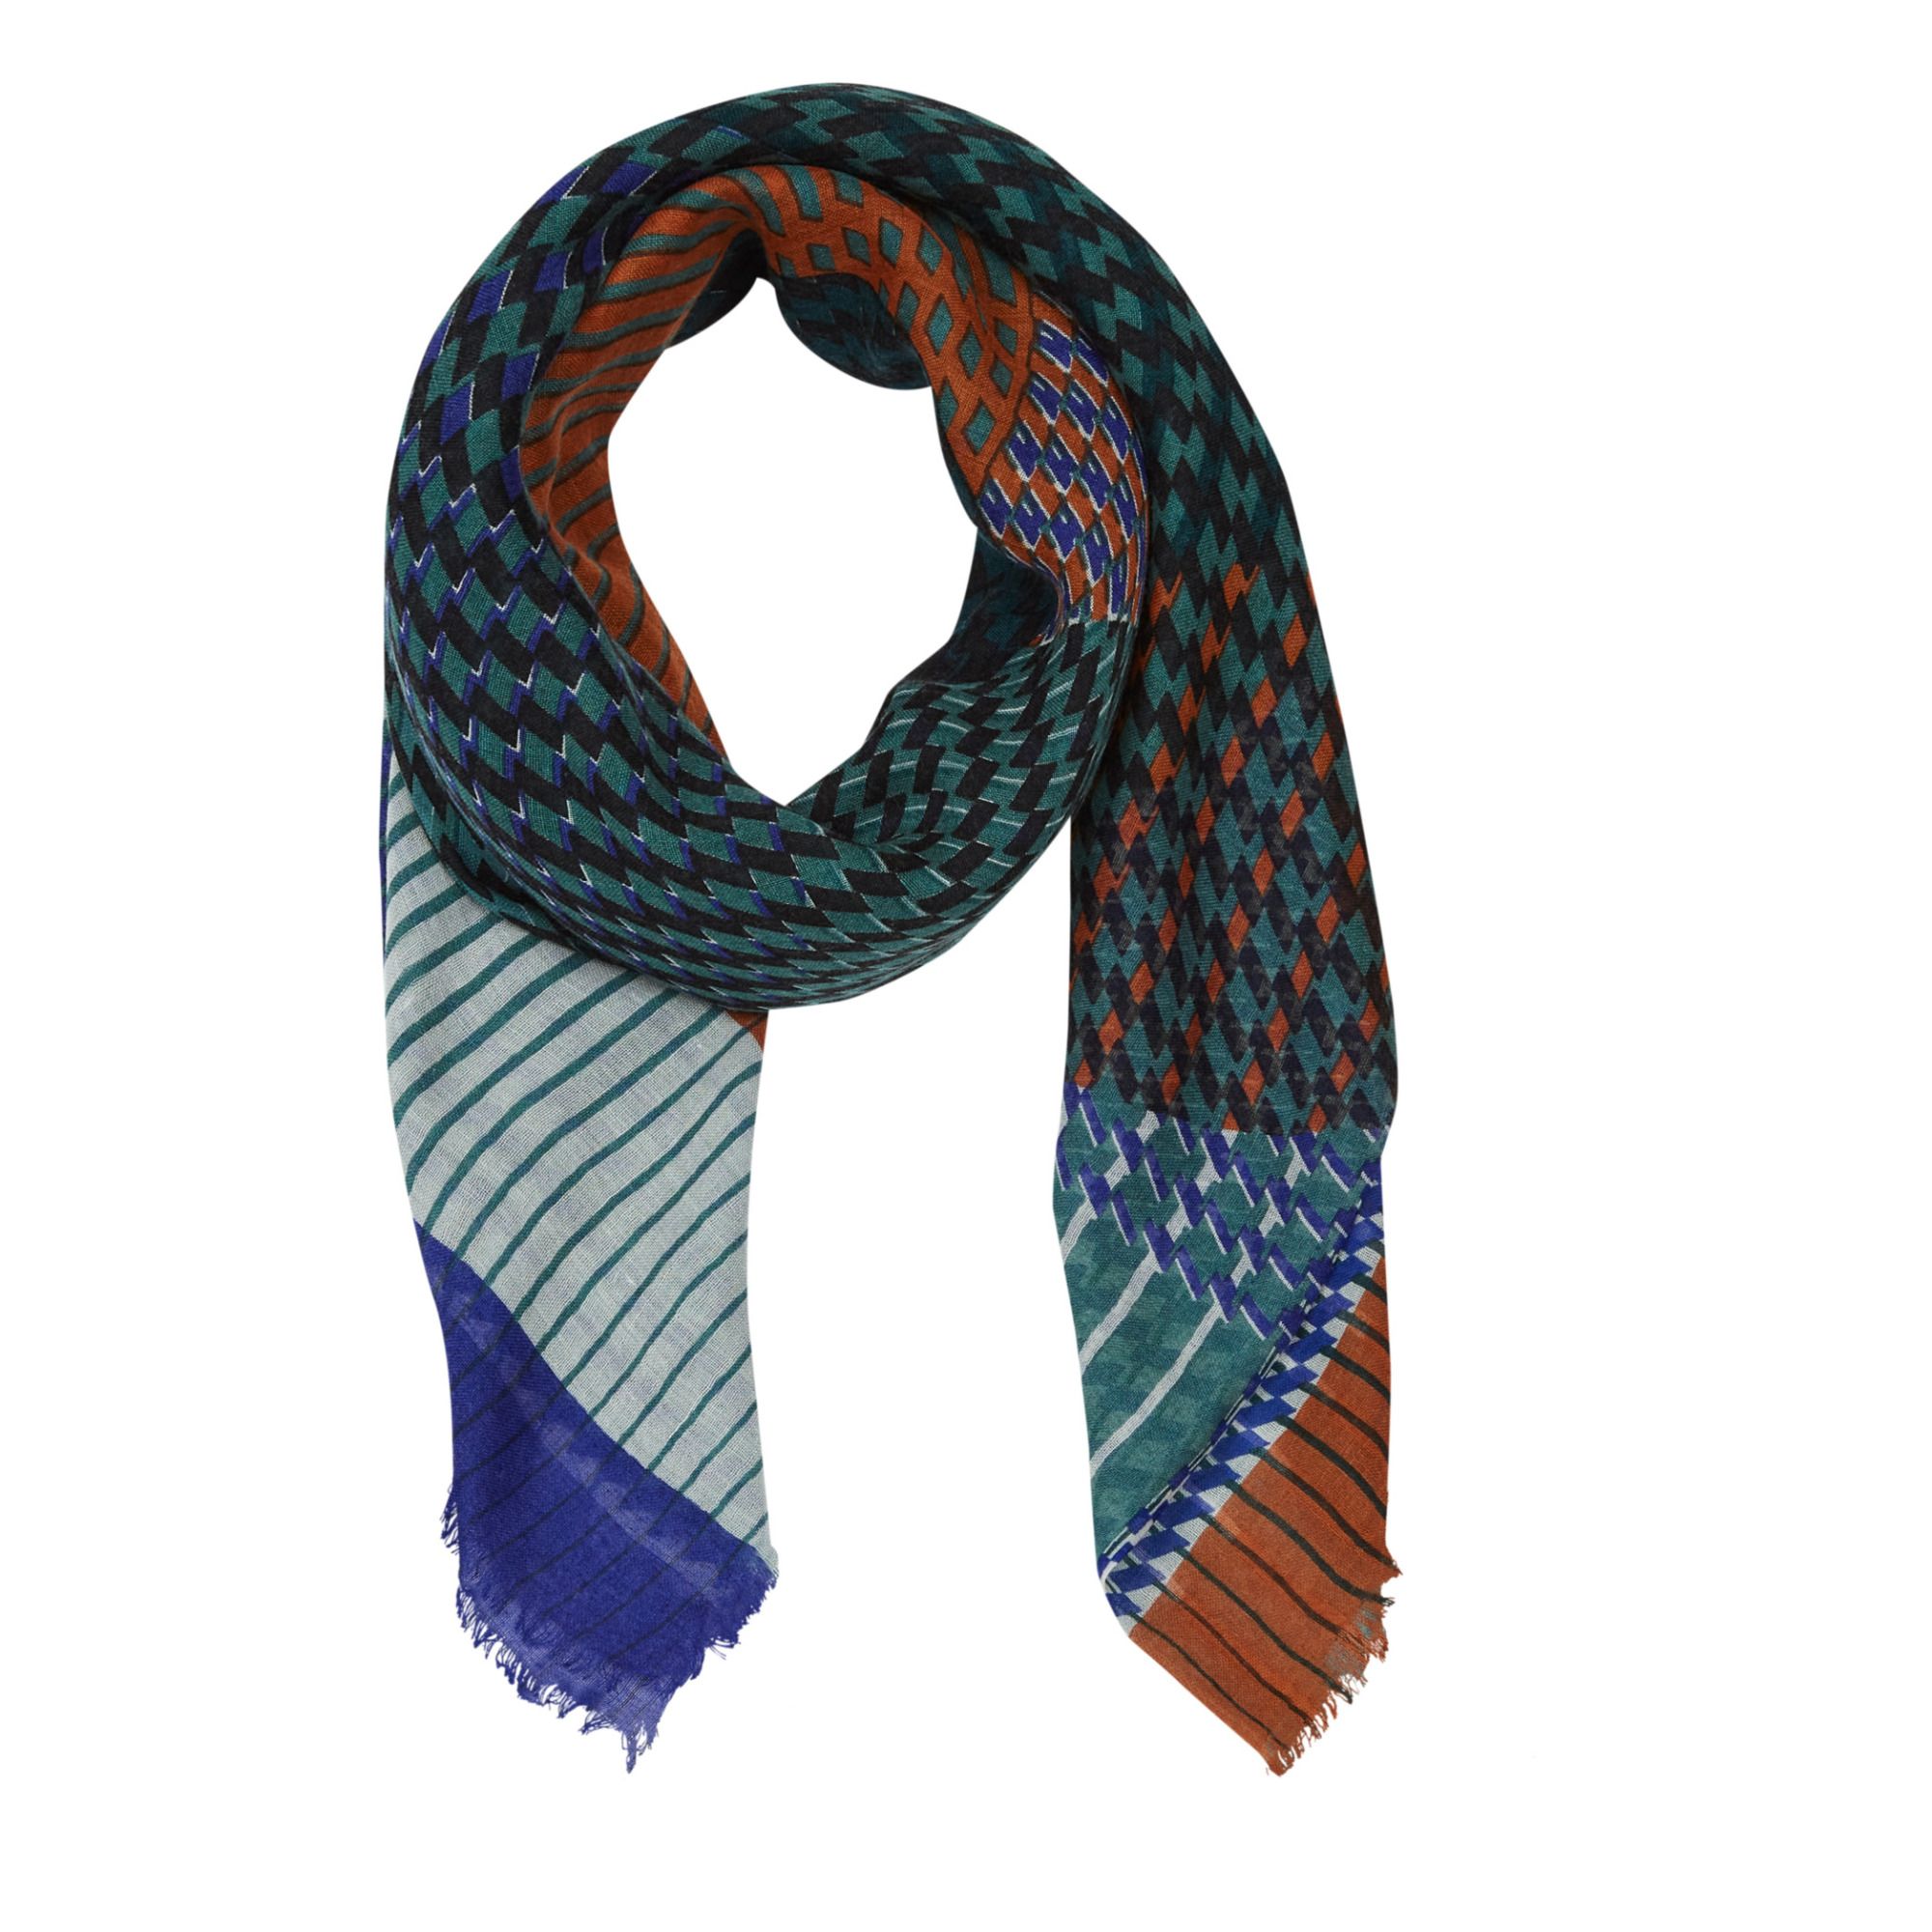 See Design Small Totem Wool Scarf